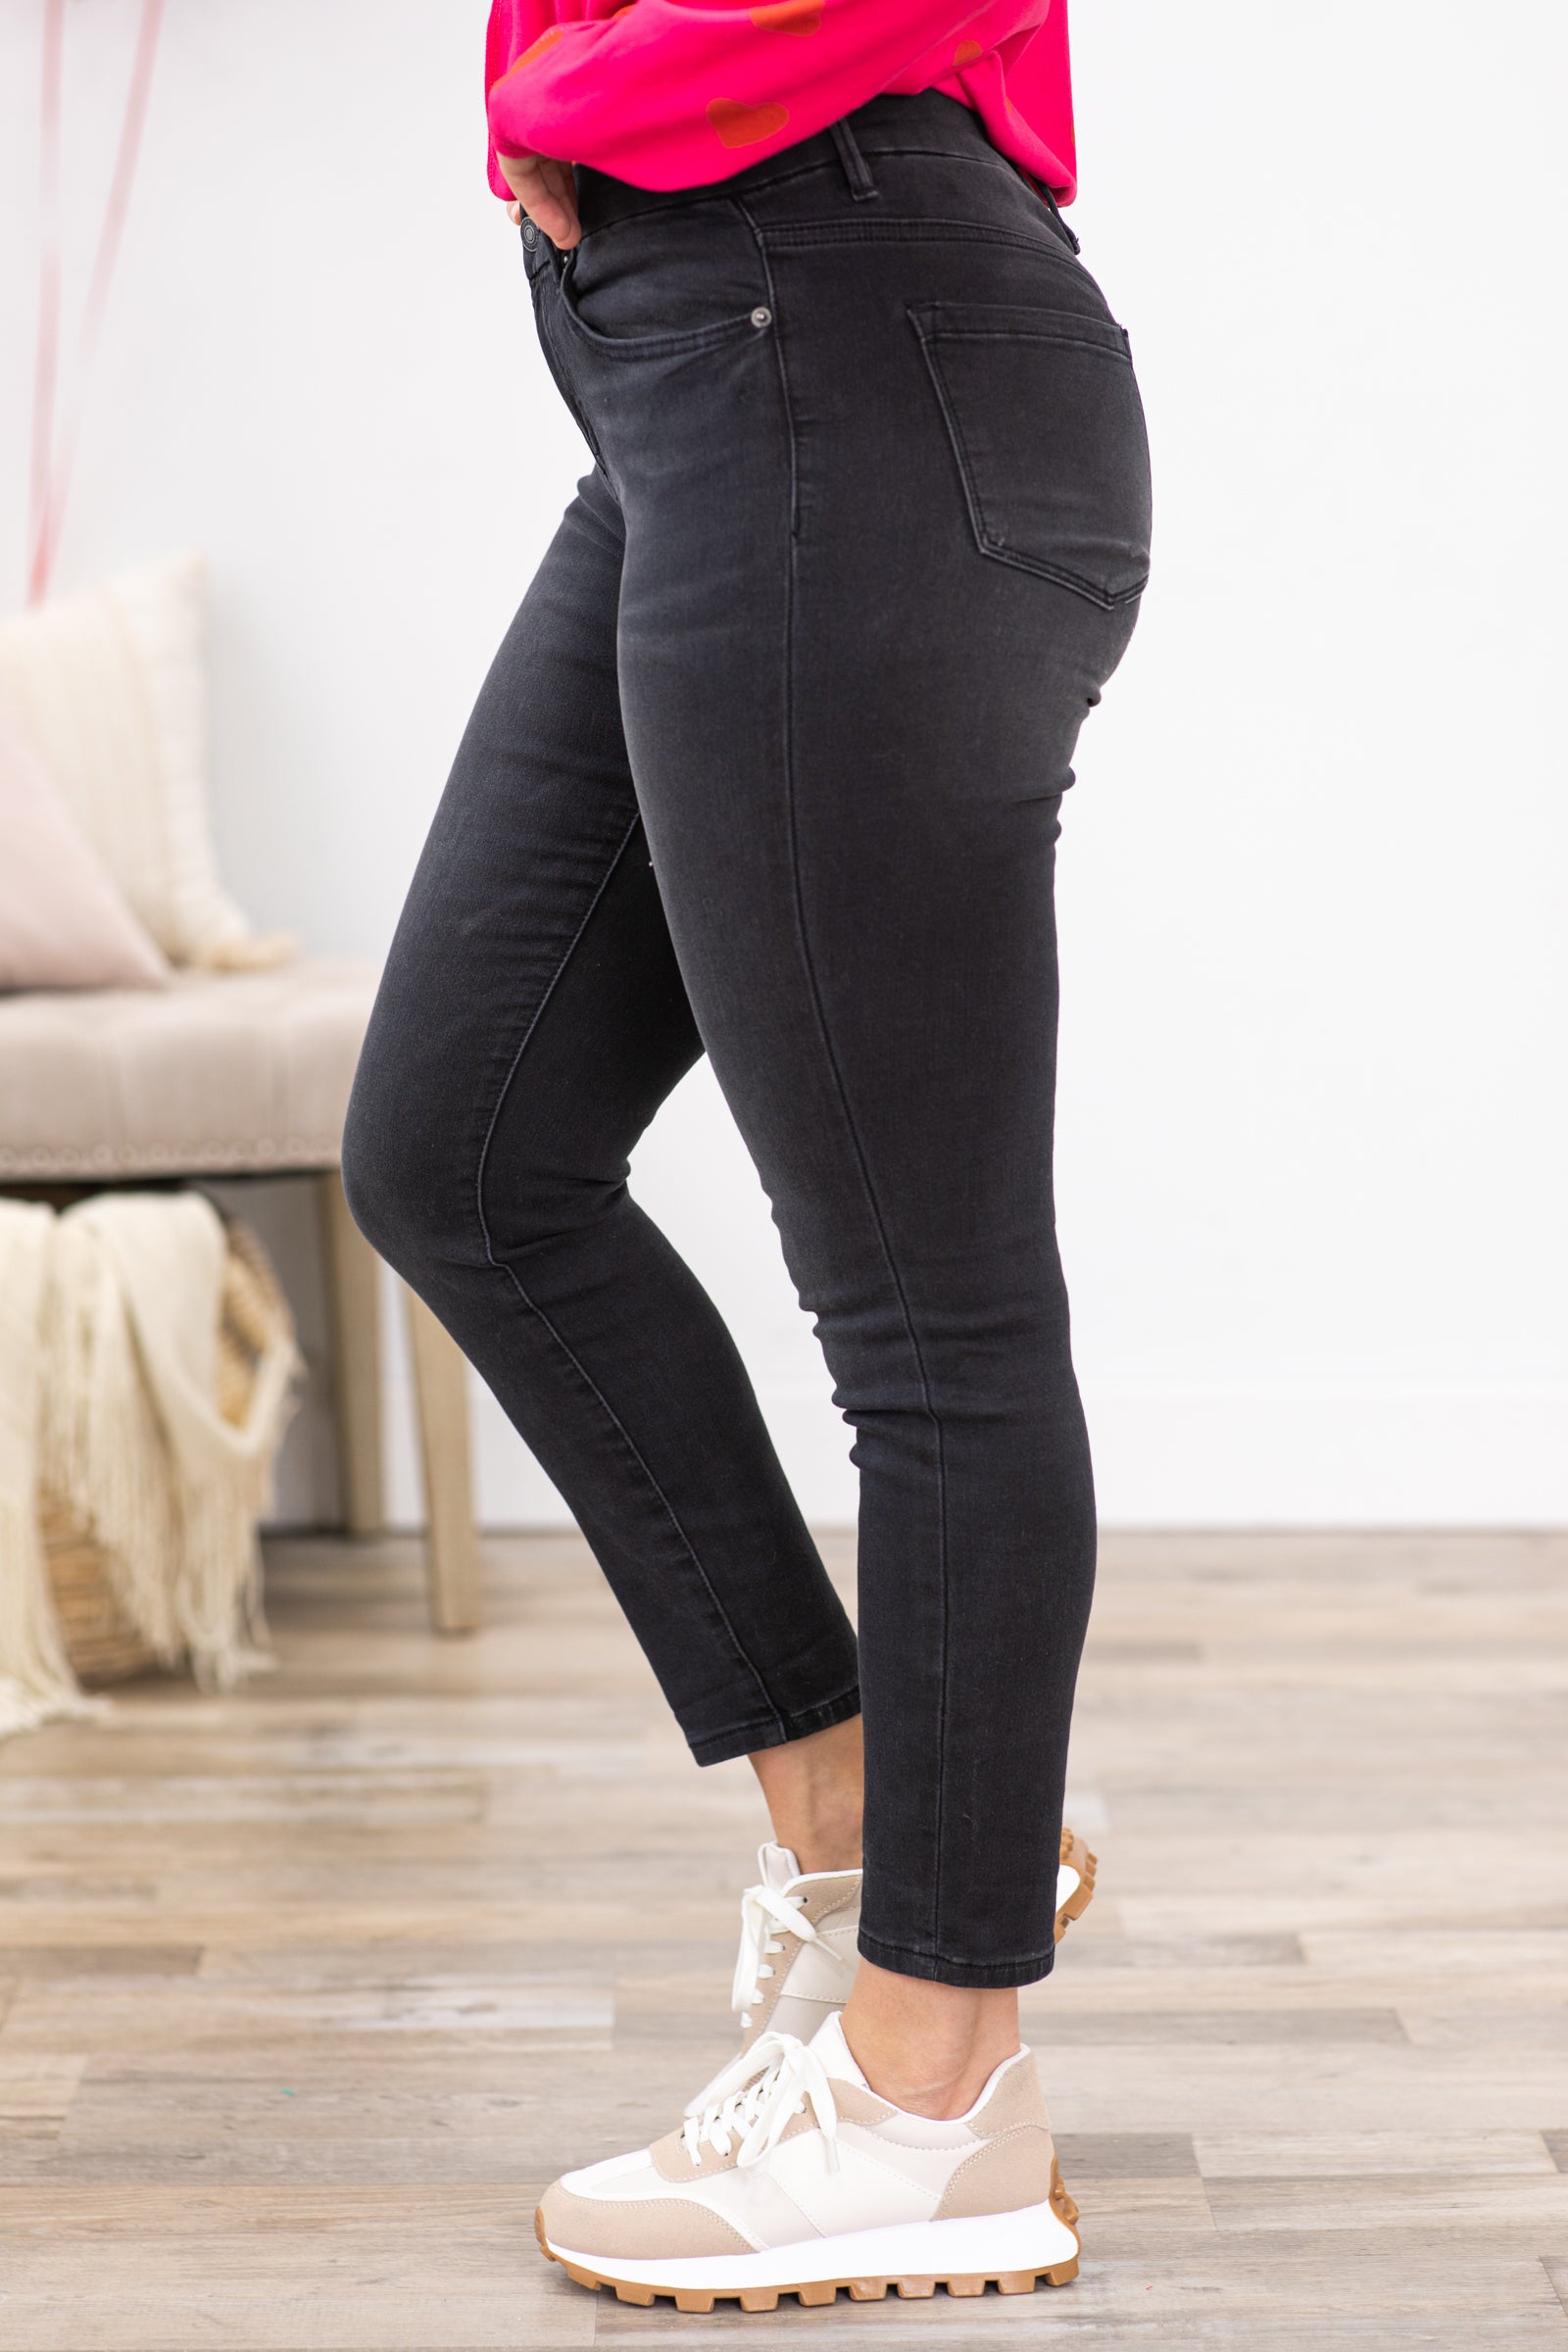 Mica Black Mid Rise Knit Jeans